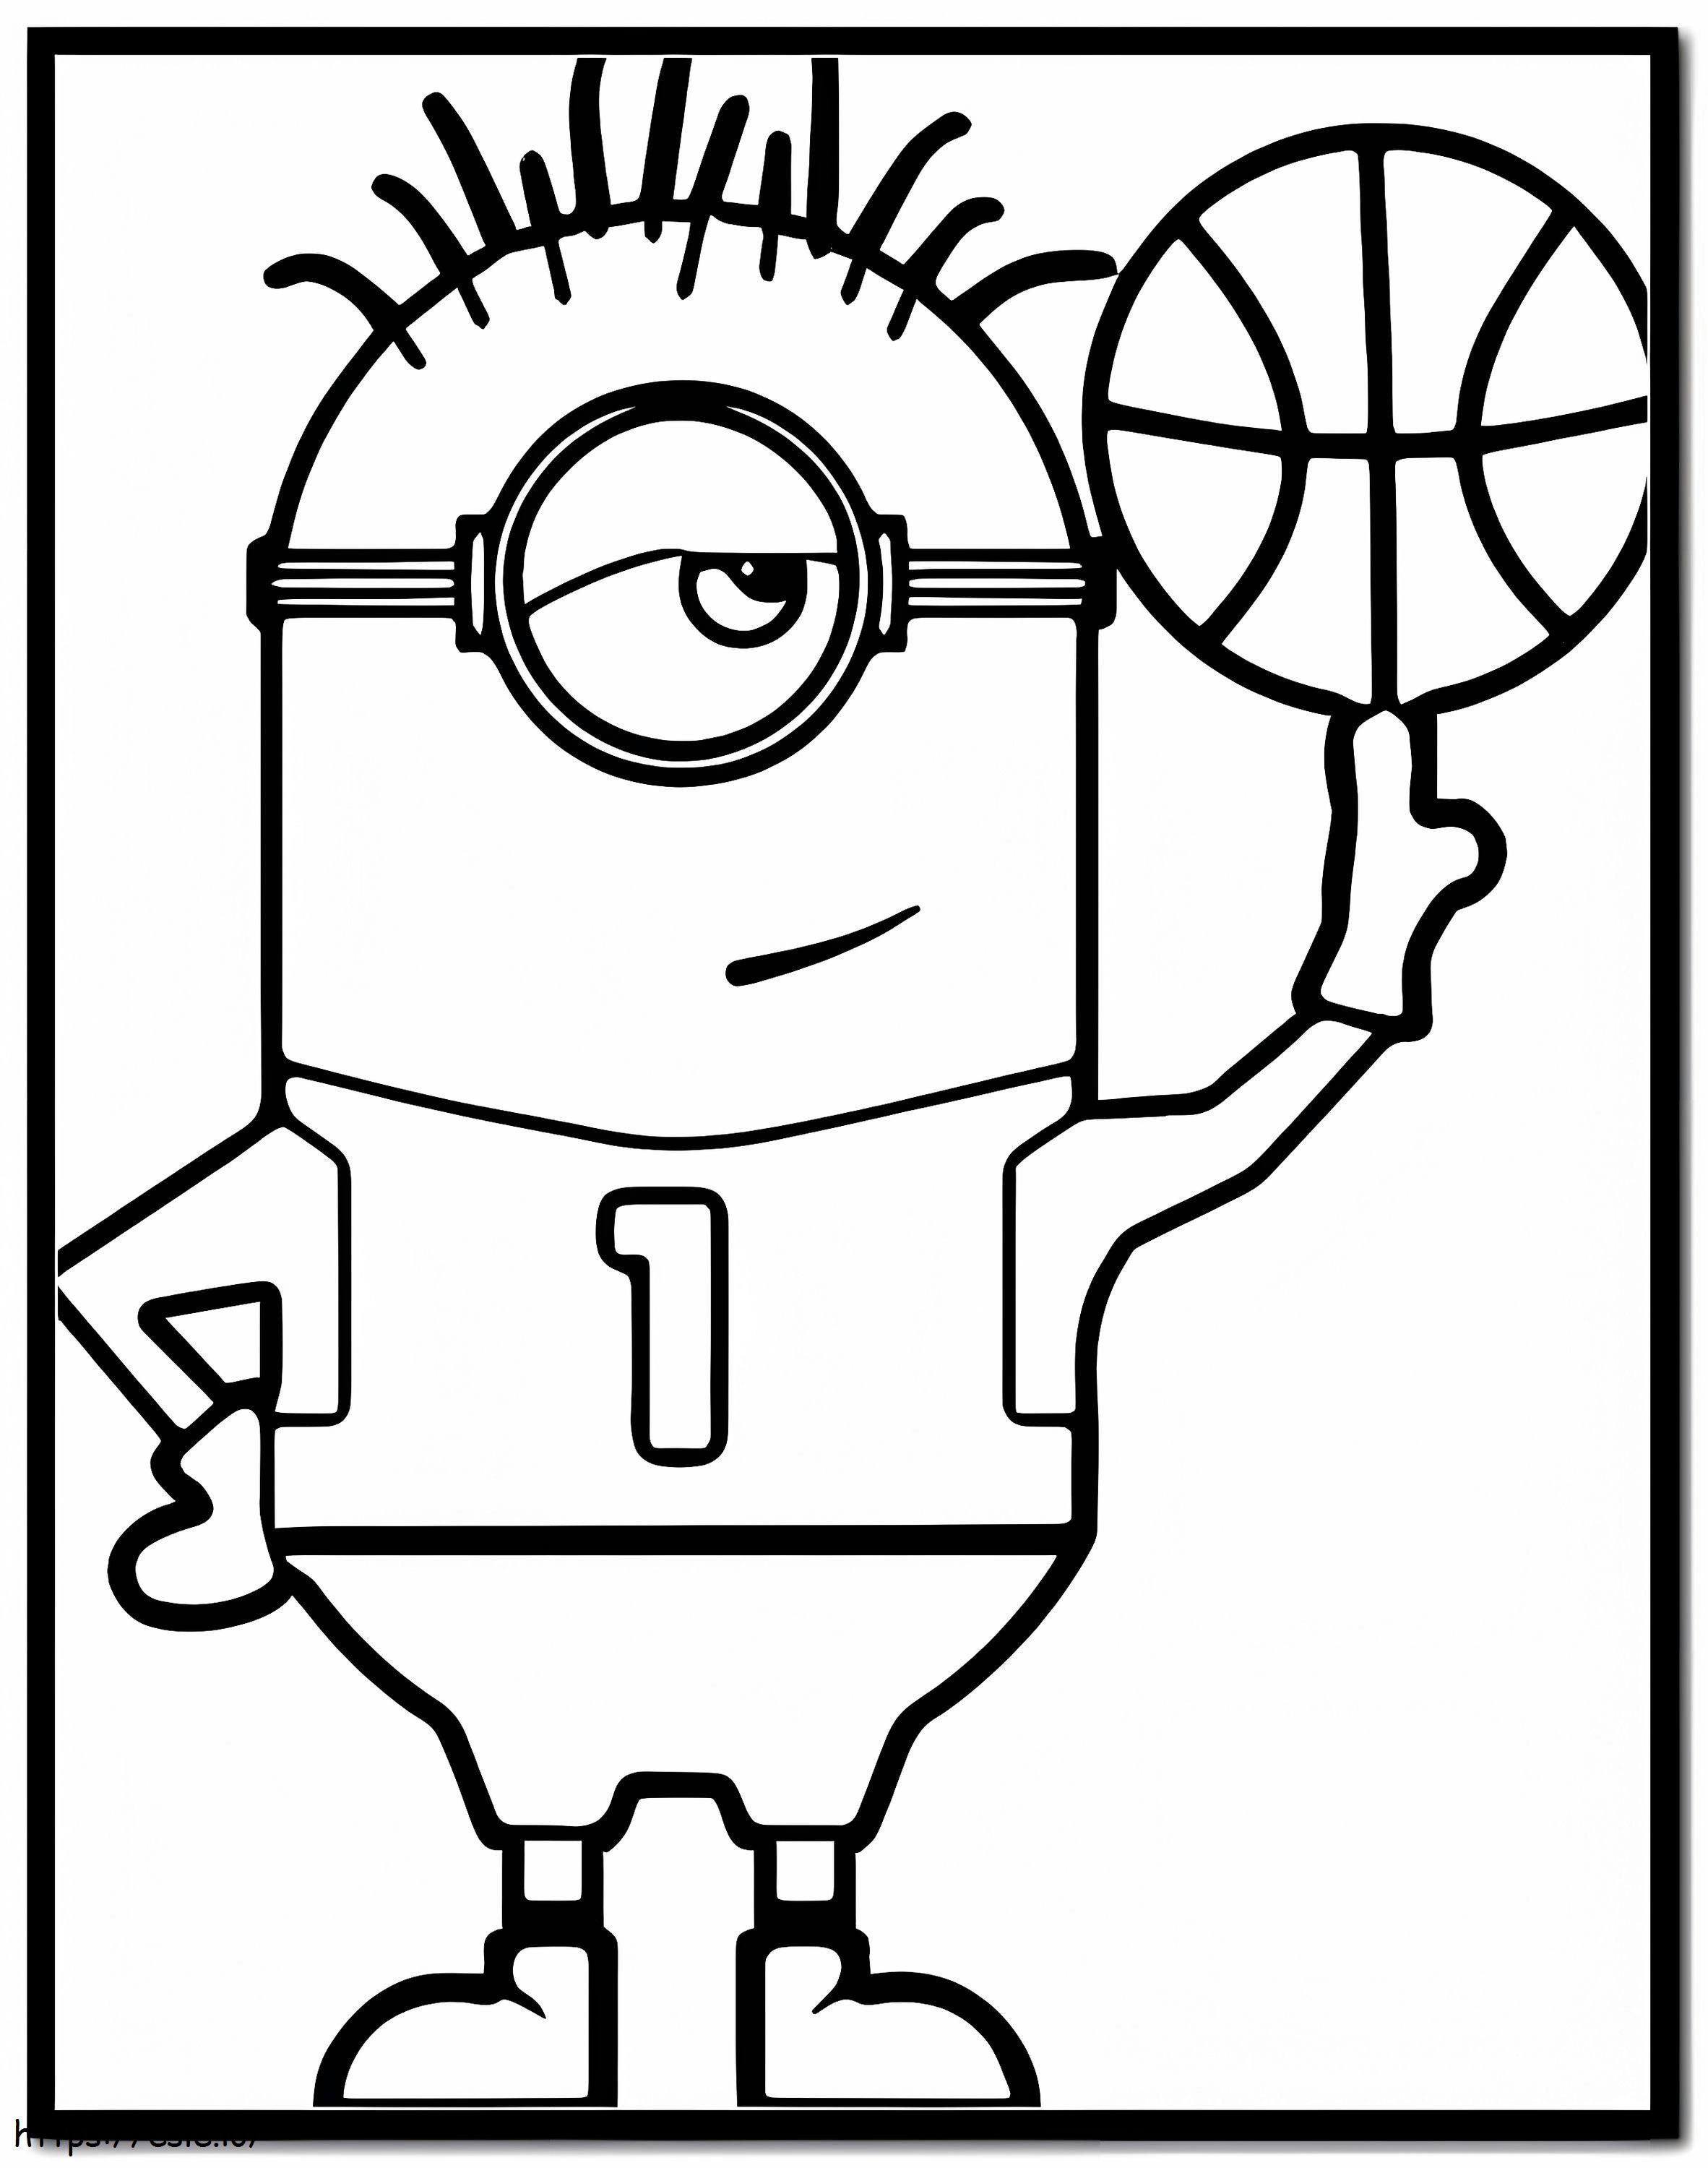 Minions Playing Basketball coloring page